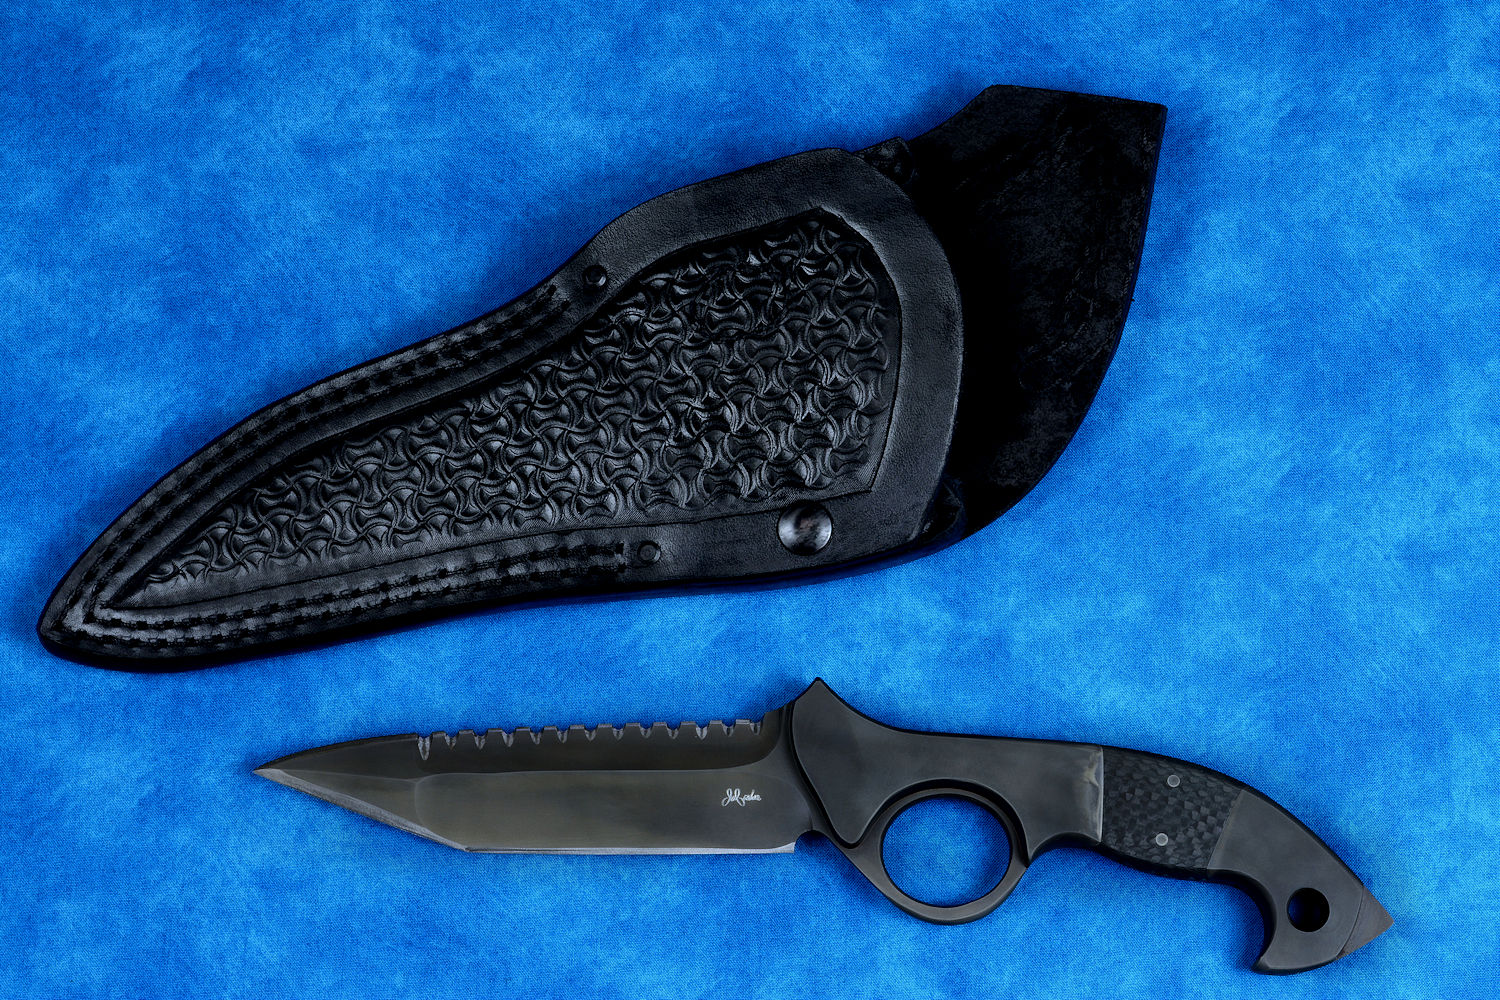 "Ari B'Lilah" counterterrorism, tactical, combat knife, obverse side view in T4 cryogenically treated 440C high chromium martensitic stainless steel blade, 304 stainless steel bolsters, carbon fiber handle, hybrid tension tab locking sheath in kydex, anodized aluminum, anodized titanium, black oxide stainless steel